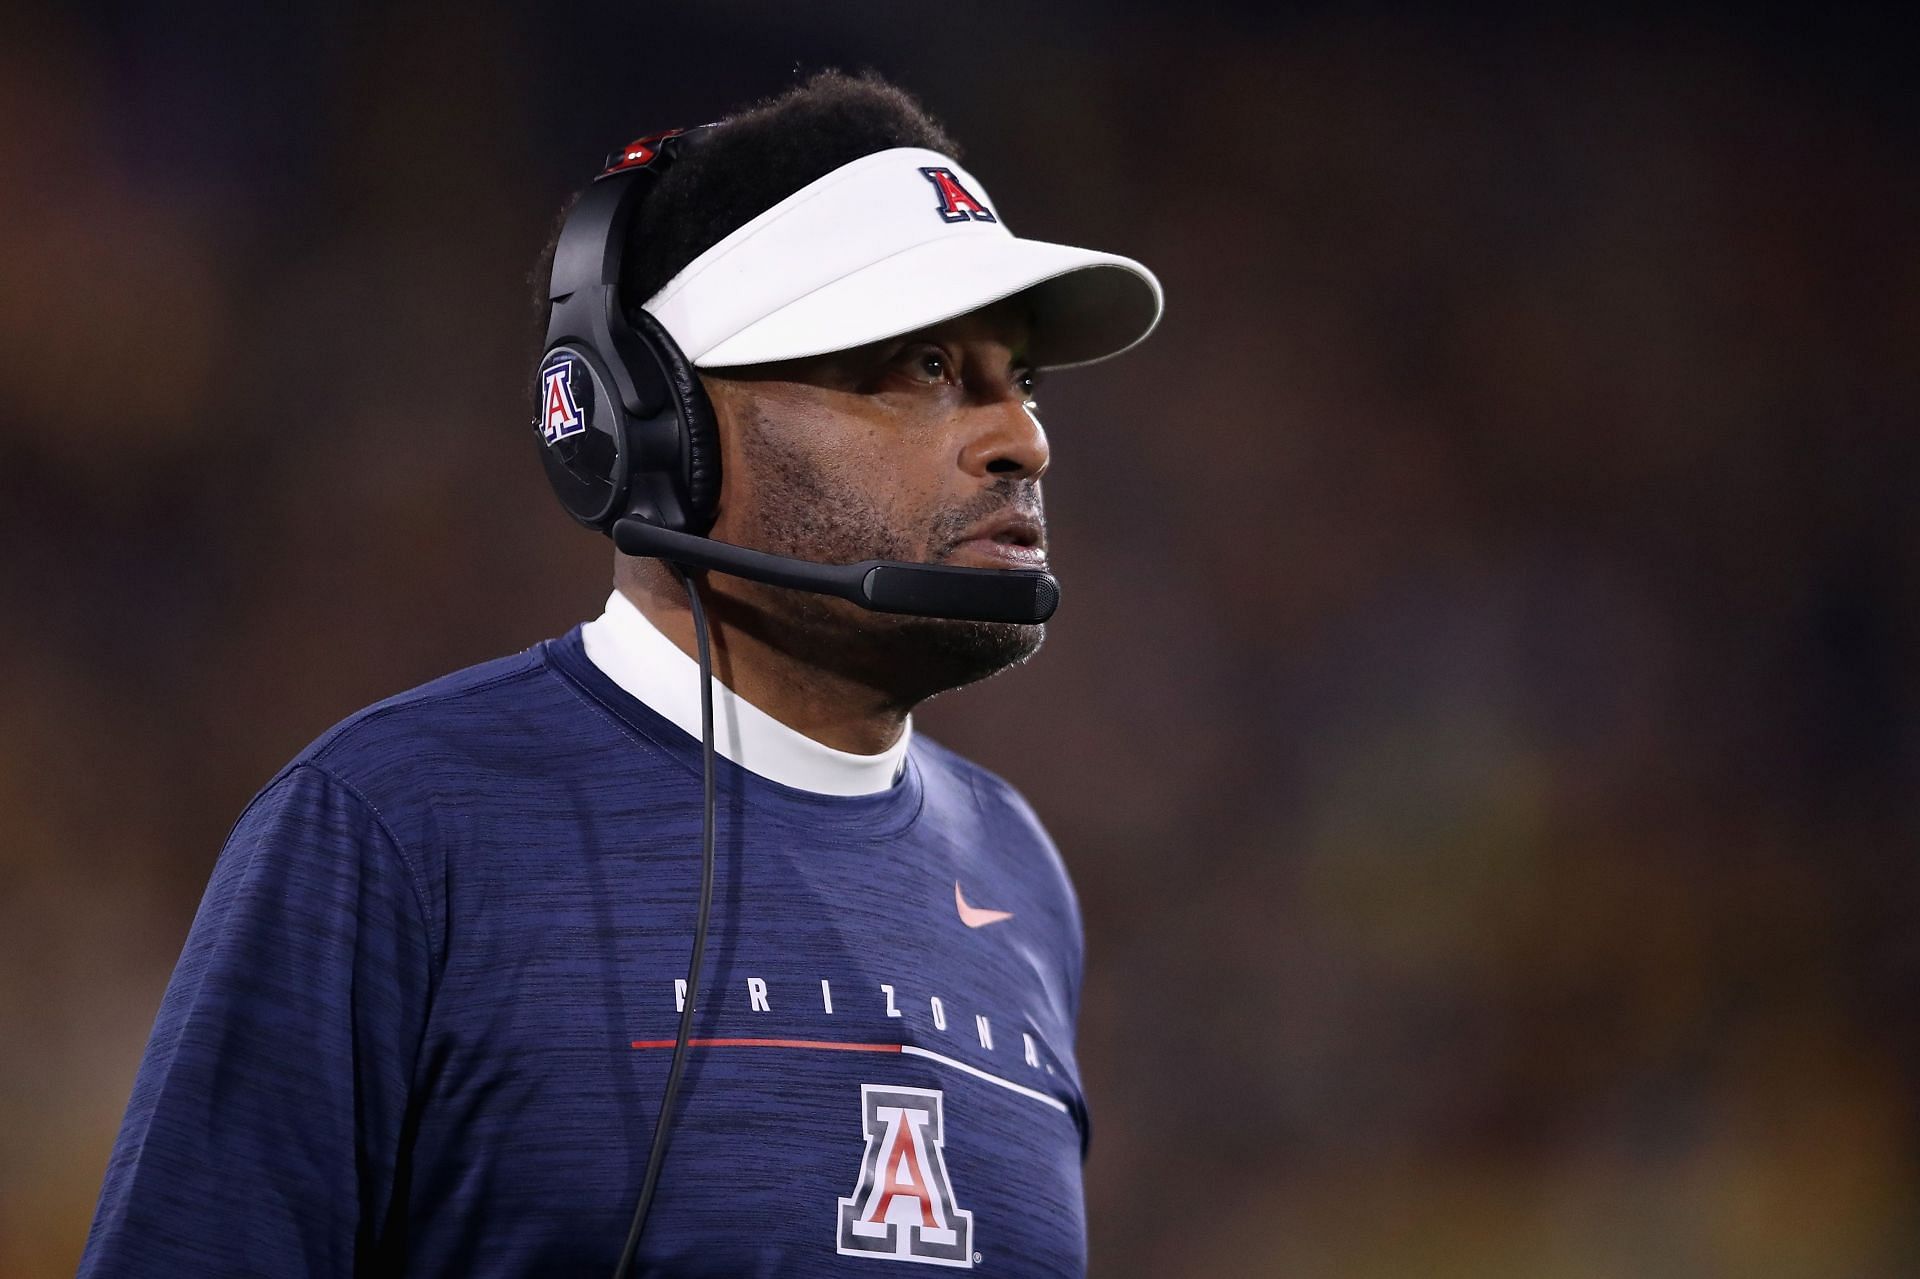 The USFL will be a good interview for Kevin Sumlin.